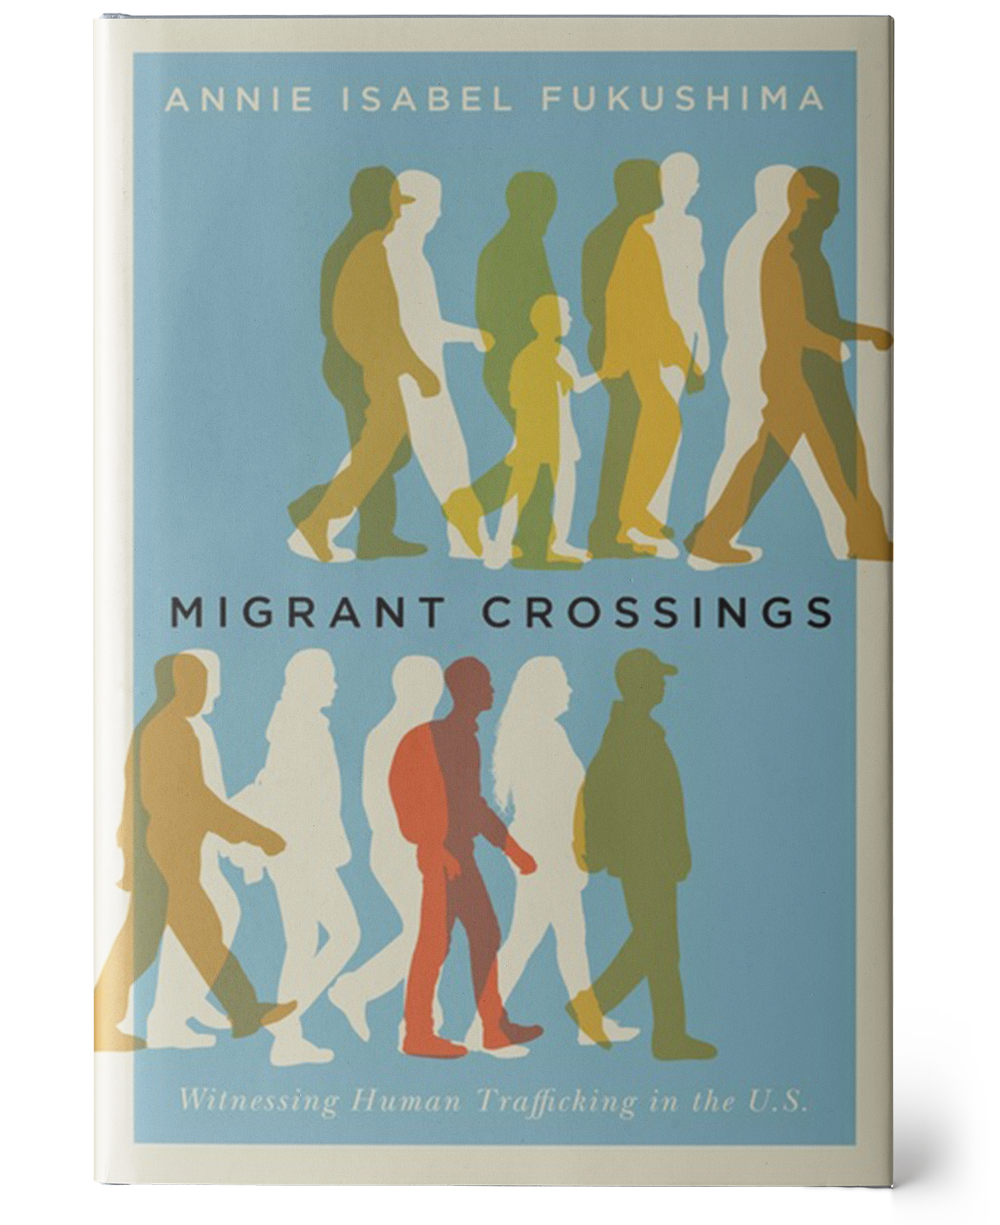 a light blue book cover with a beige border. At the top of the cover reads the author's name in beige, 'Annie Isabel Fukushima'. Below the name are two rows of beige-colored silhouettes of people walking to the right. Superimposed on these silhouettes are translucent silhouettes in red, gold, and burnt orange also walking to the right. The main title of the book, 'Migrant Crossings', sits between the rows of people in a black. The beige subtitle, 'Witnessing Human Trafficking in the U.S.', is displayed at the bottom between the second row of people and the border.